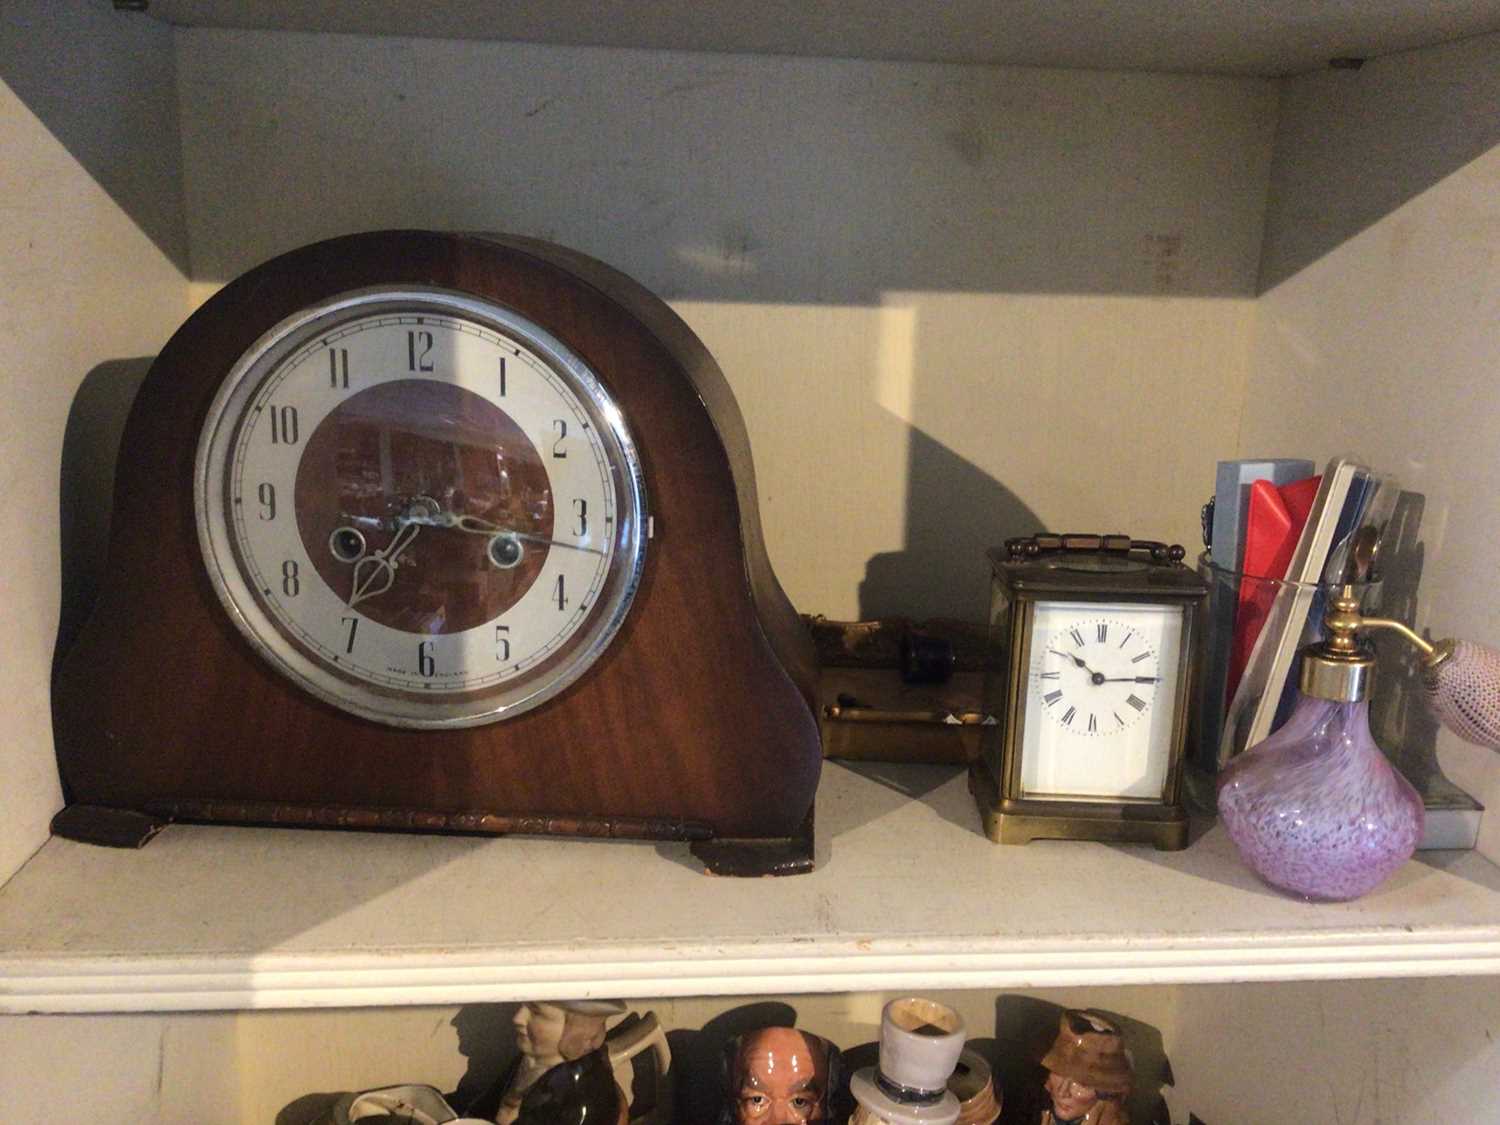 Brass carriage clock, mantel clock, and other items